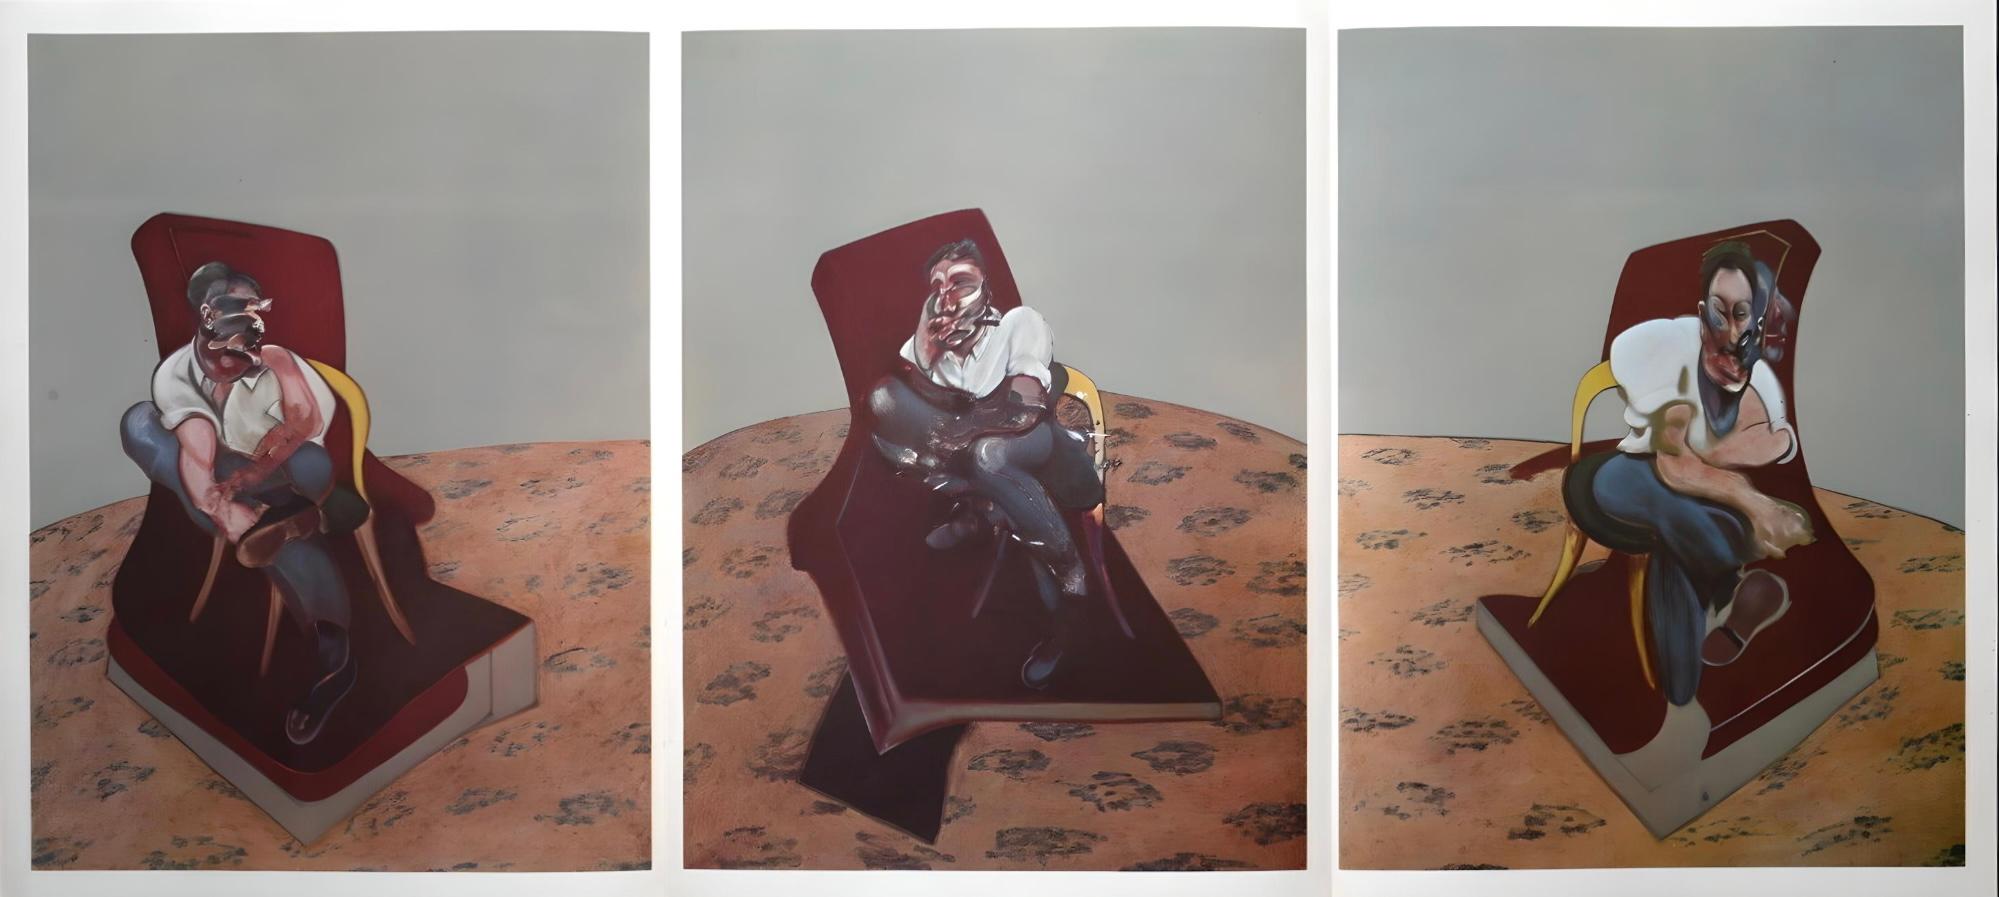 Francis Bacon Abstract Print - Bacon, Three Studies for Portrait of Lucian Freud, Derrière le miroir (after)